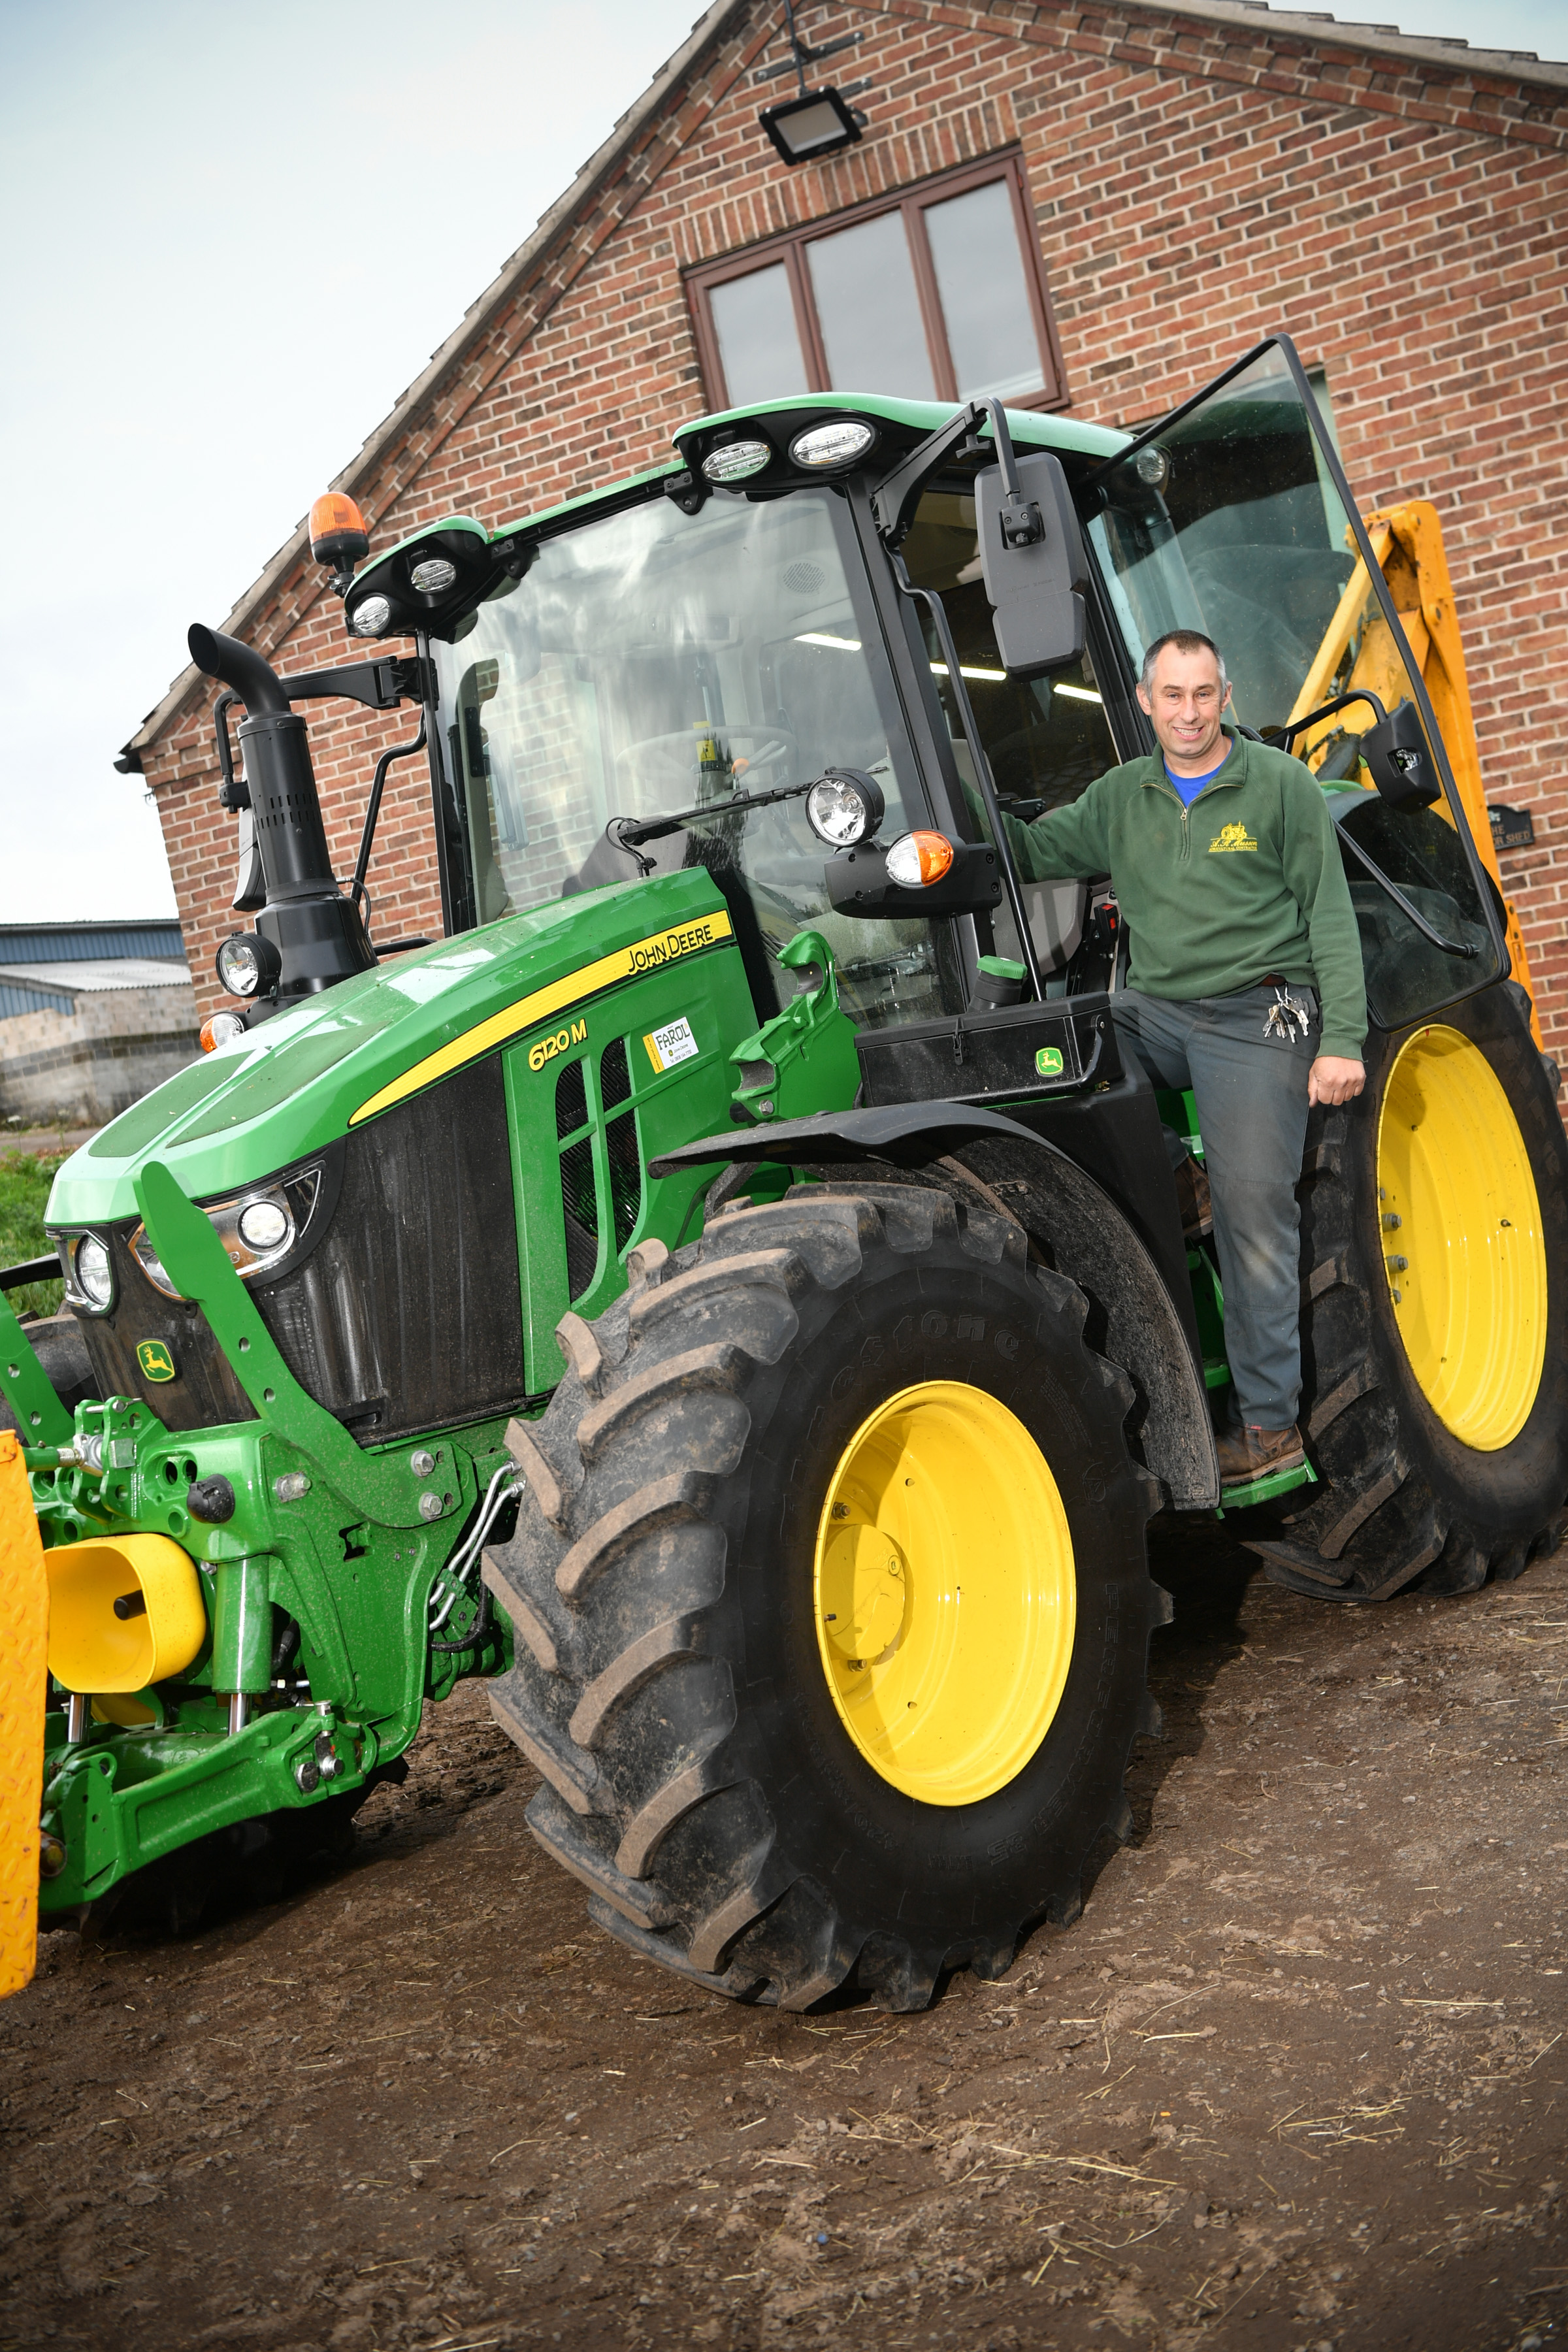 Andy with his tractor